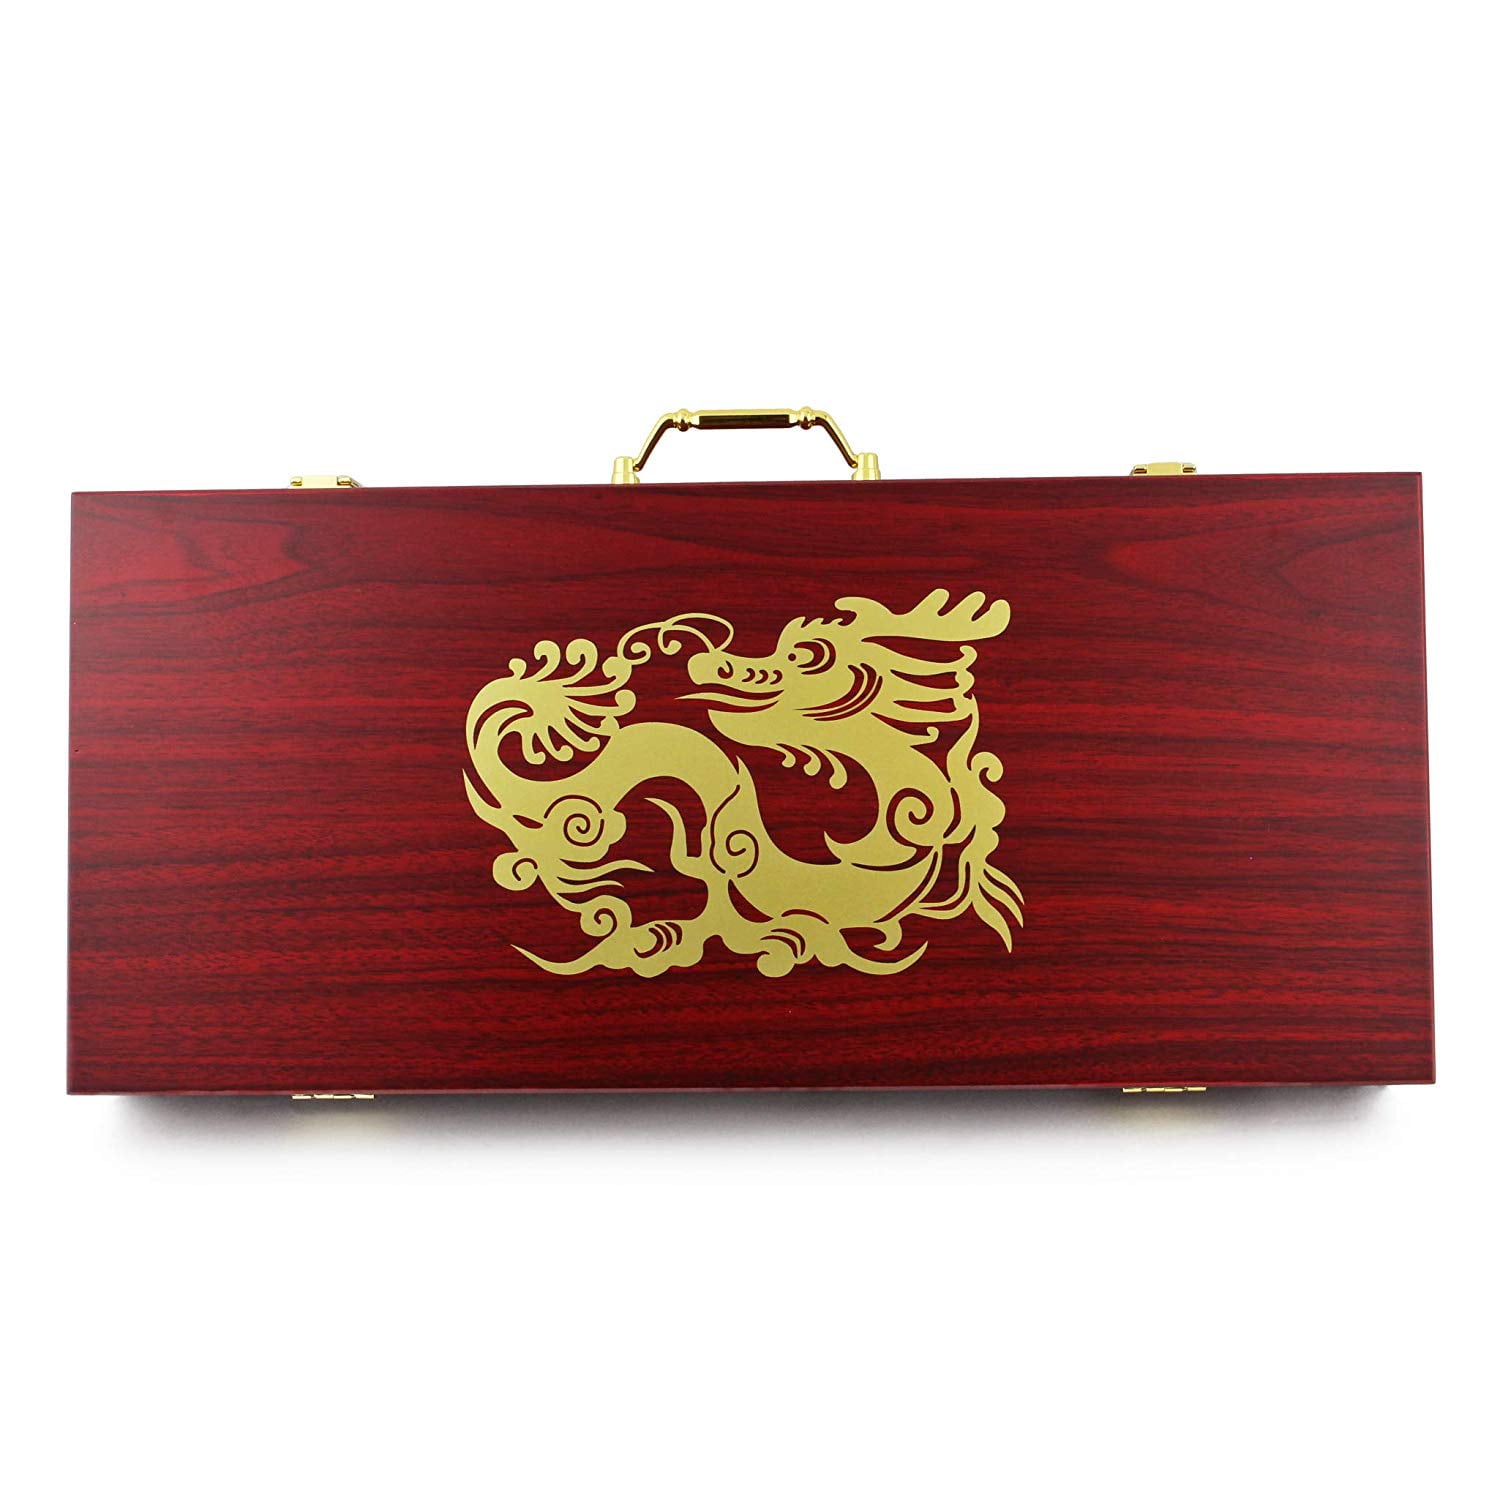 Chinese Mahjong with Wooden Box 9 x 6 x 2 inches (23x16.2x4.5